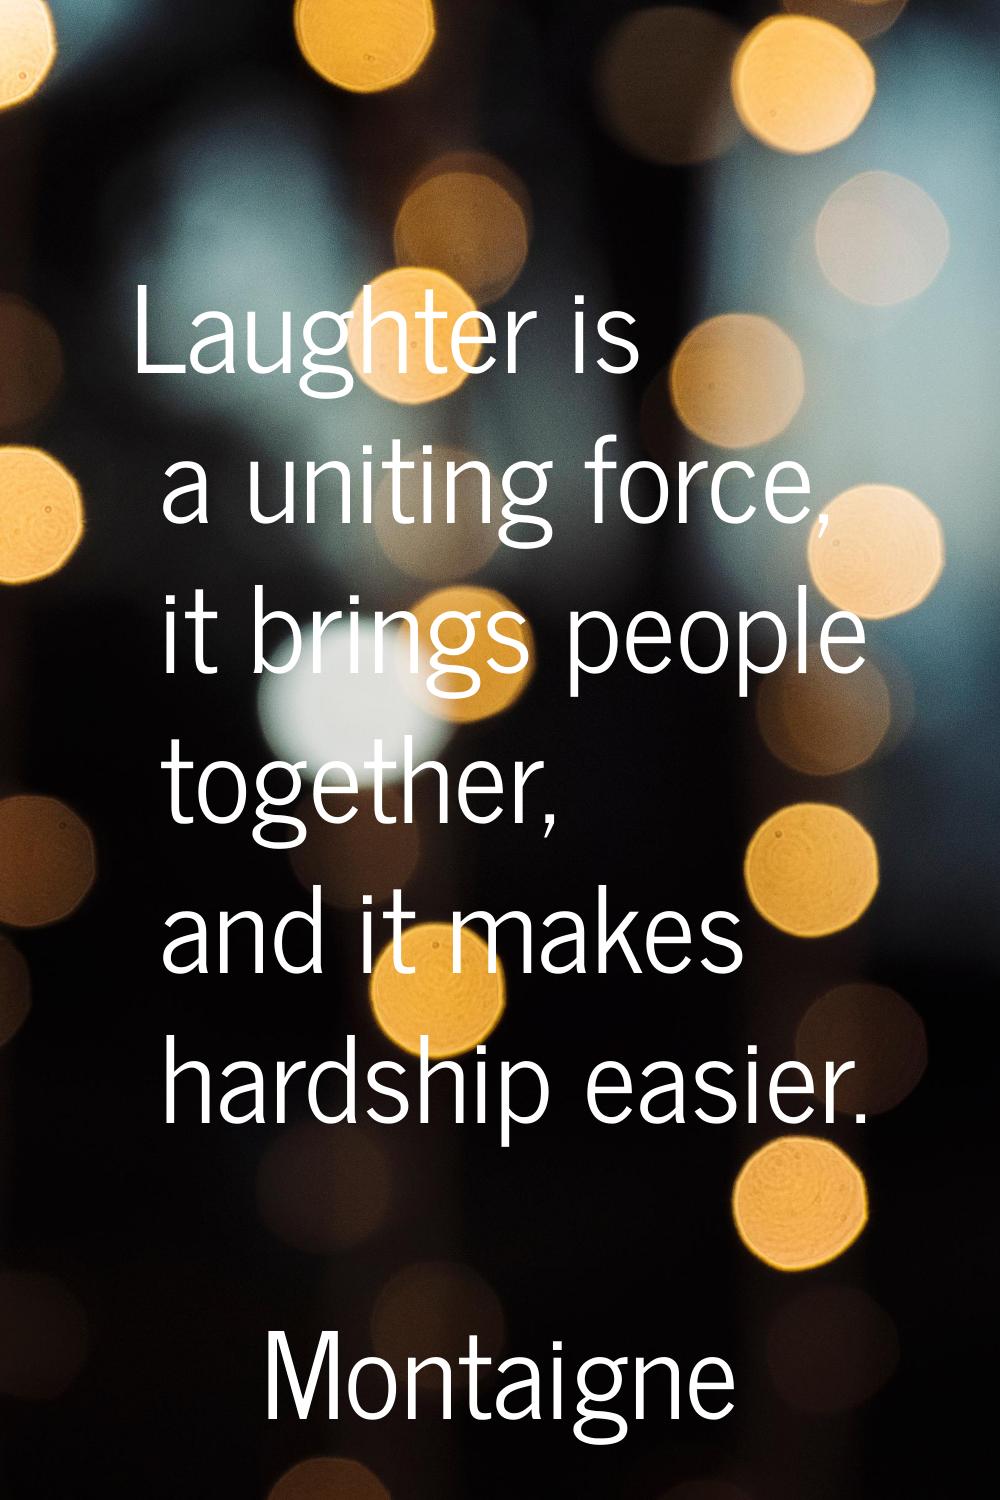 Laughter is a uniting force, it brings people together, and it makes hardship easier.